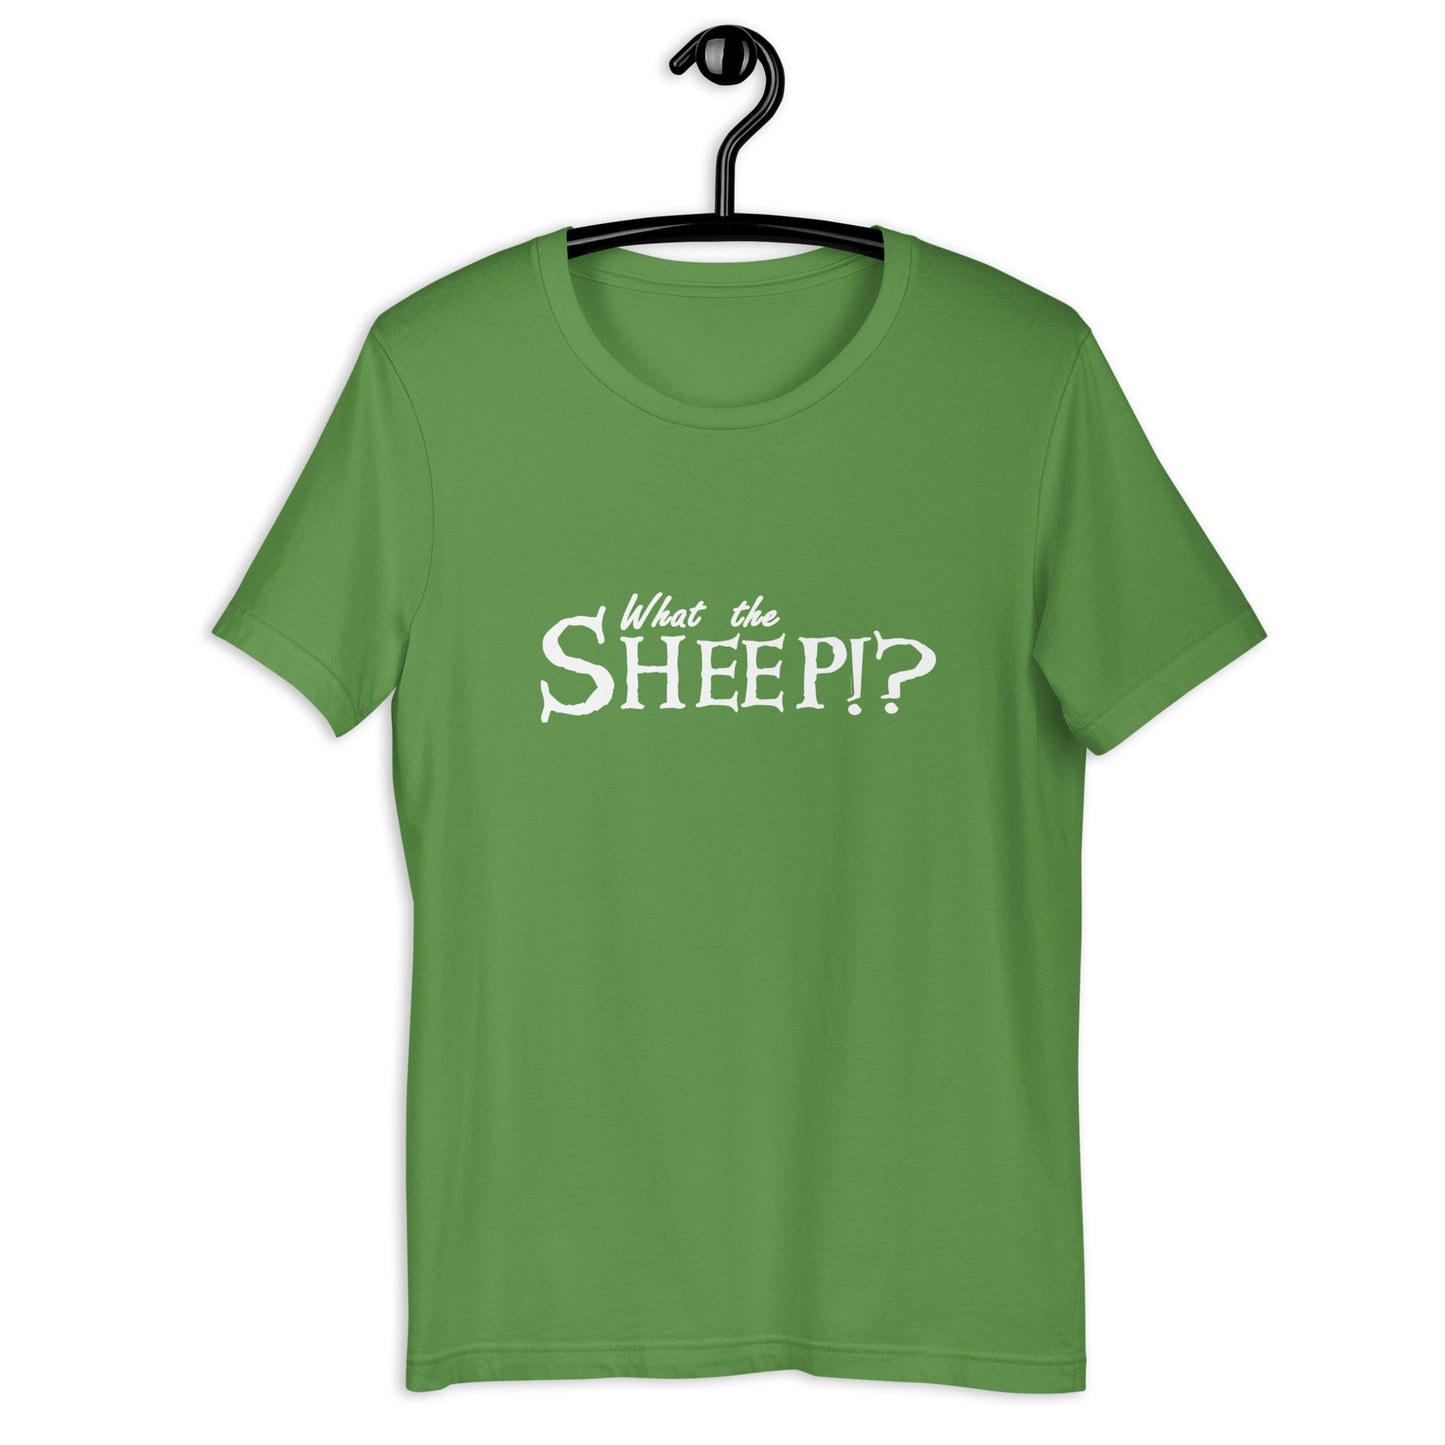 WHAT THE SHEEP? - Unisex t-shirt